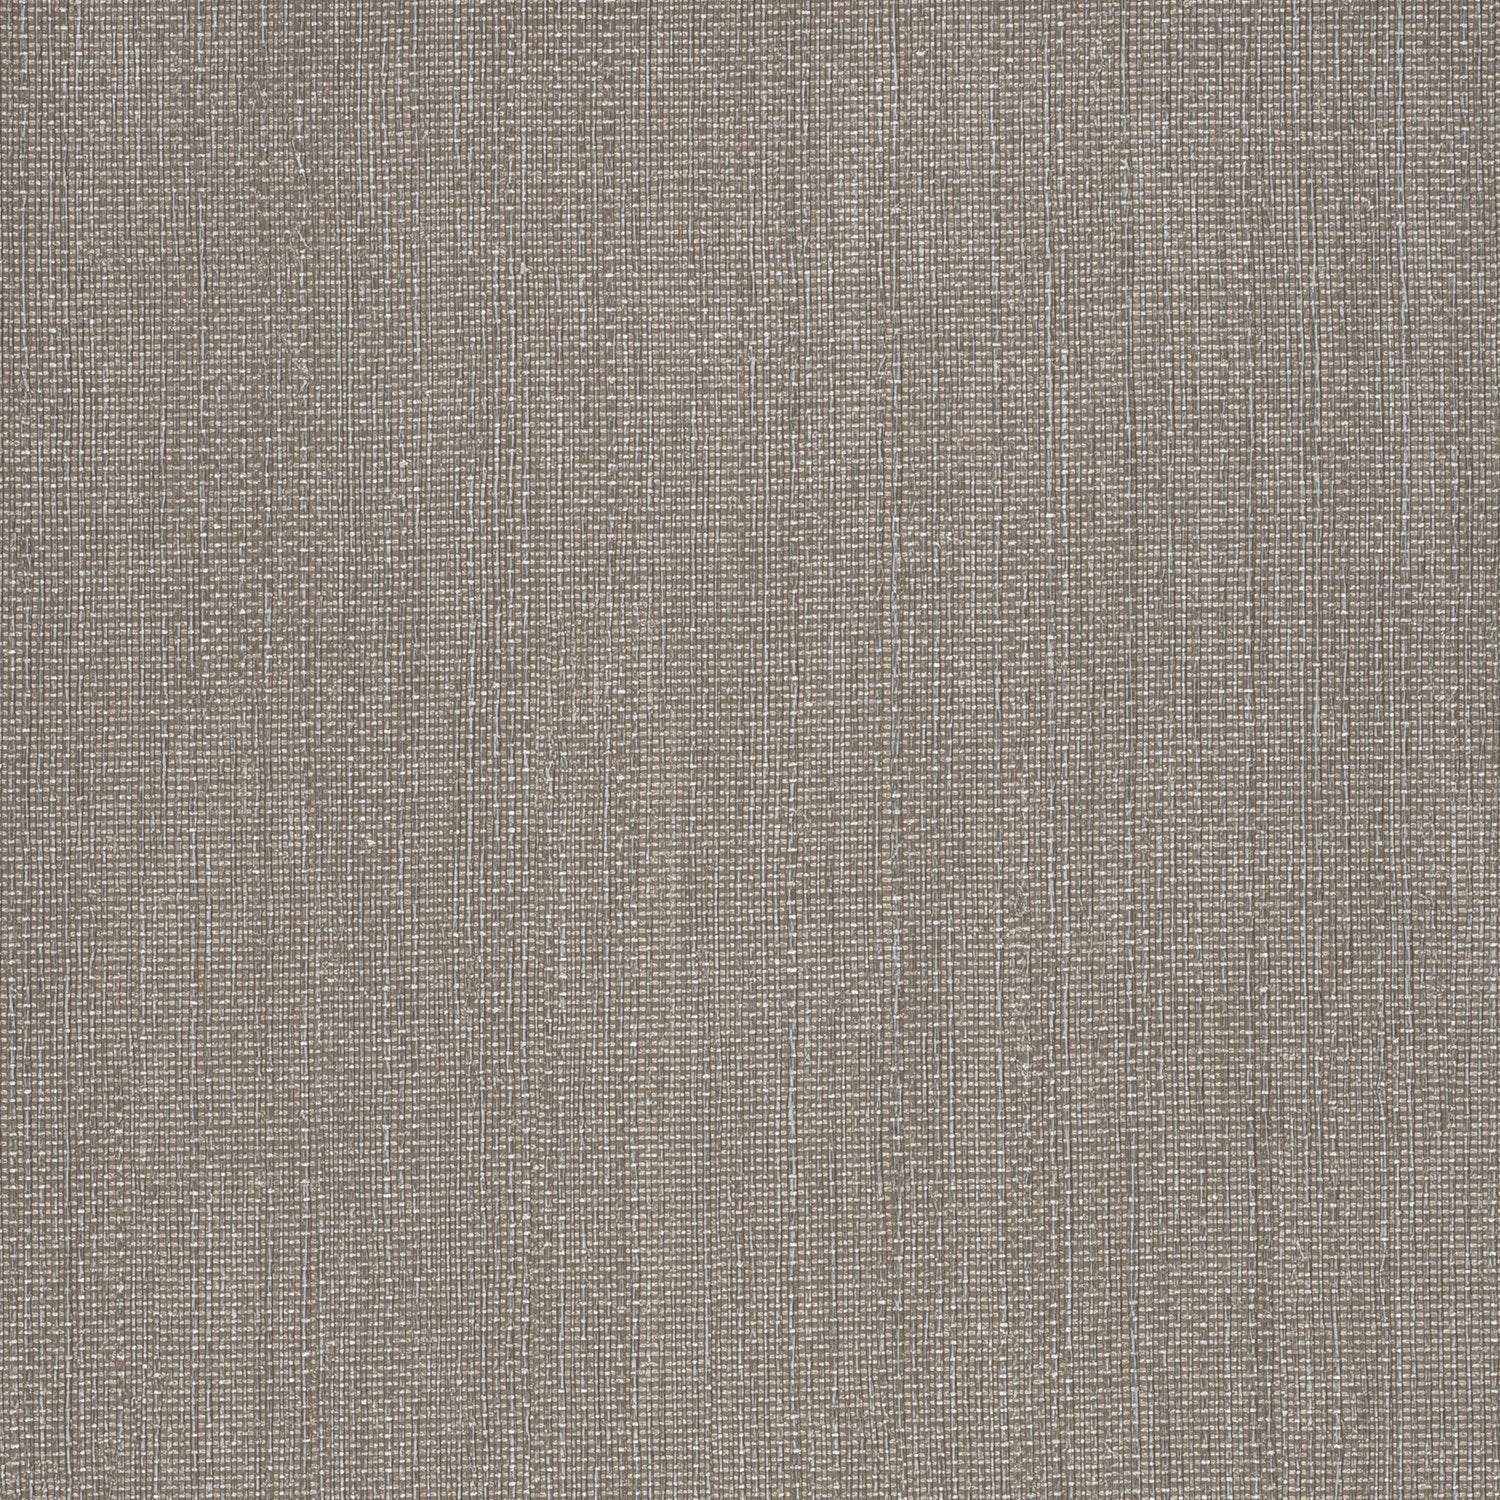 Theory - Y46433 - Wallcovering - Vycon - Kube Contract